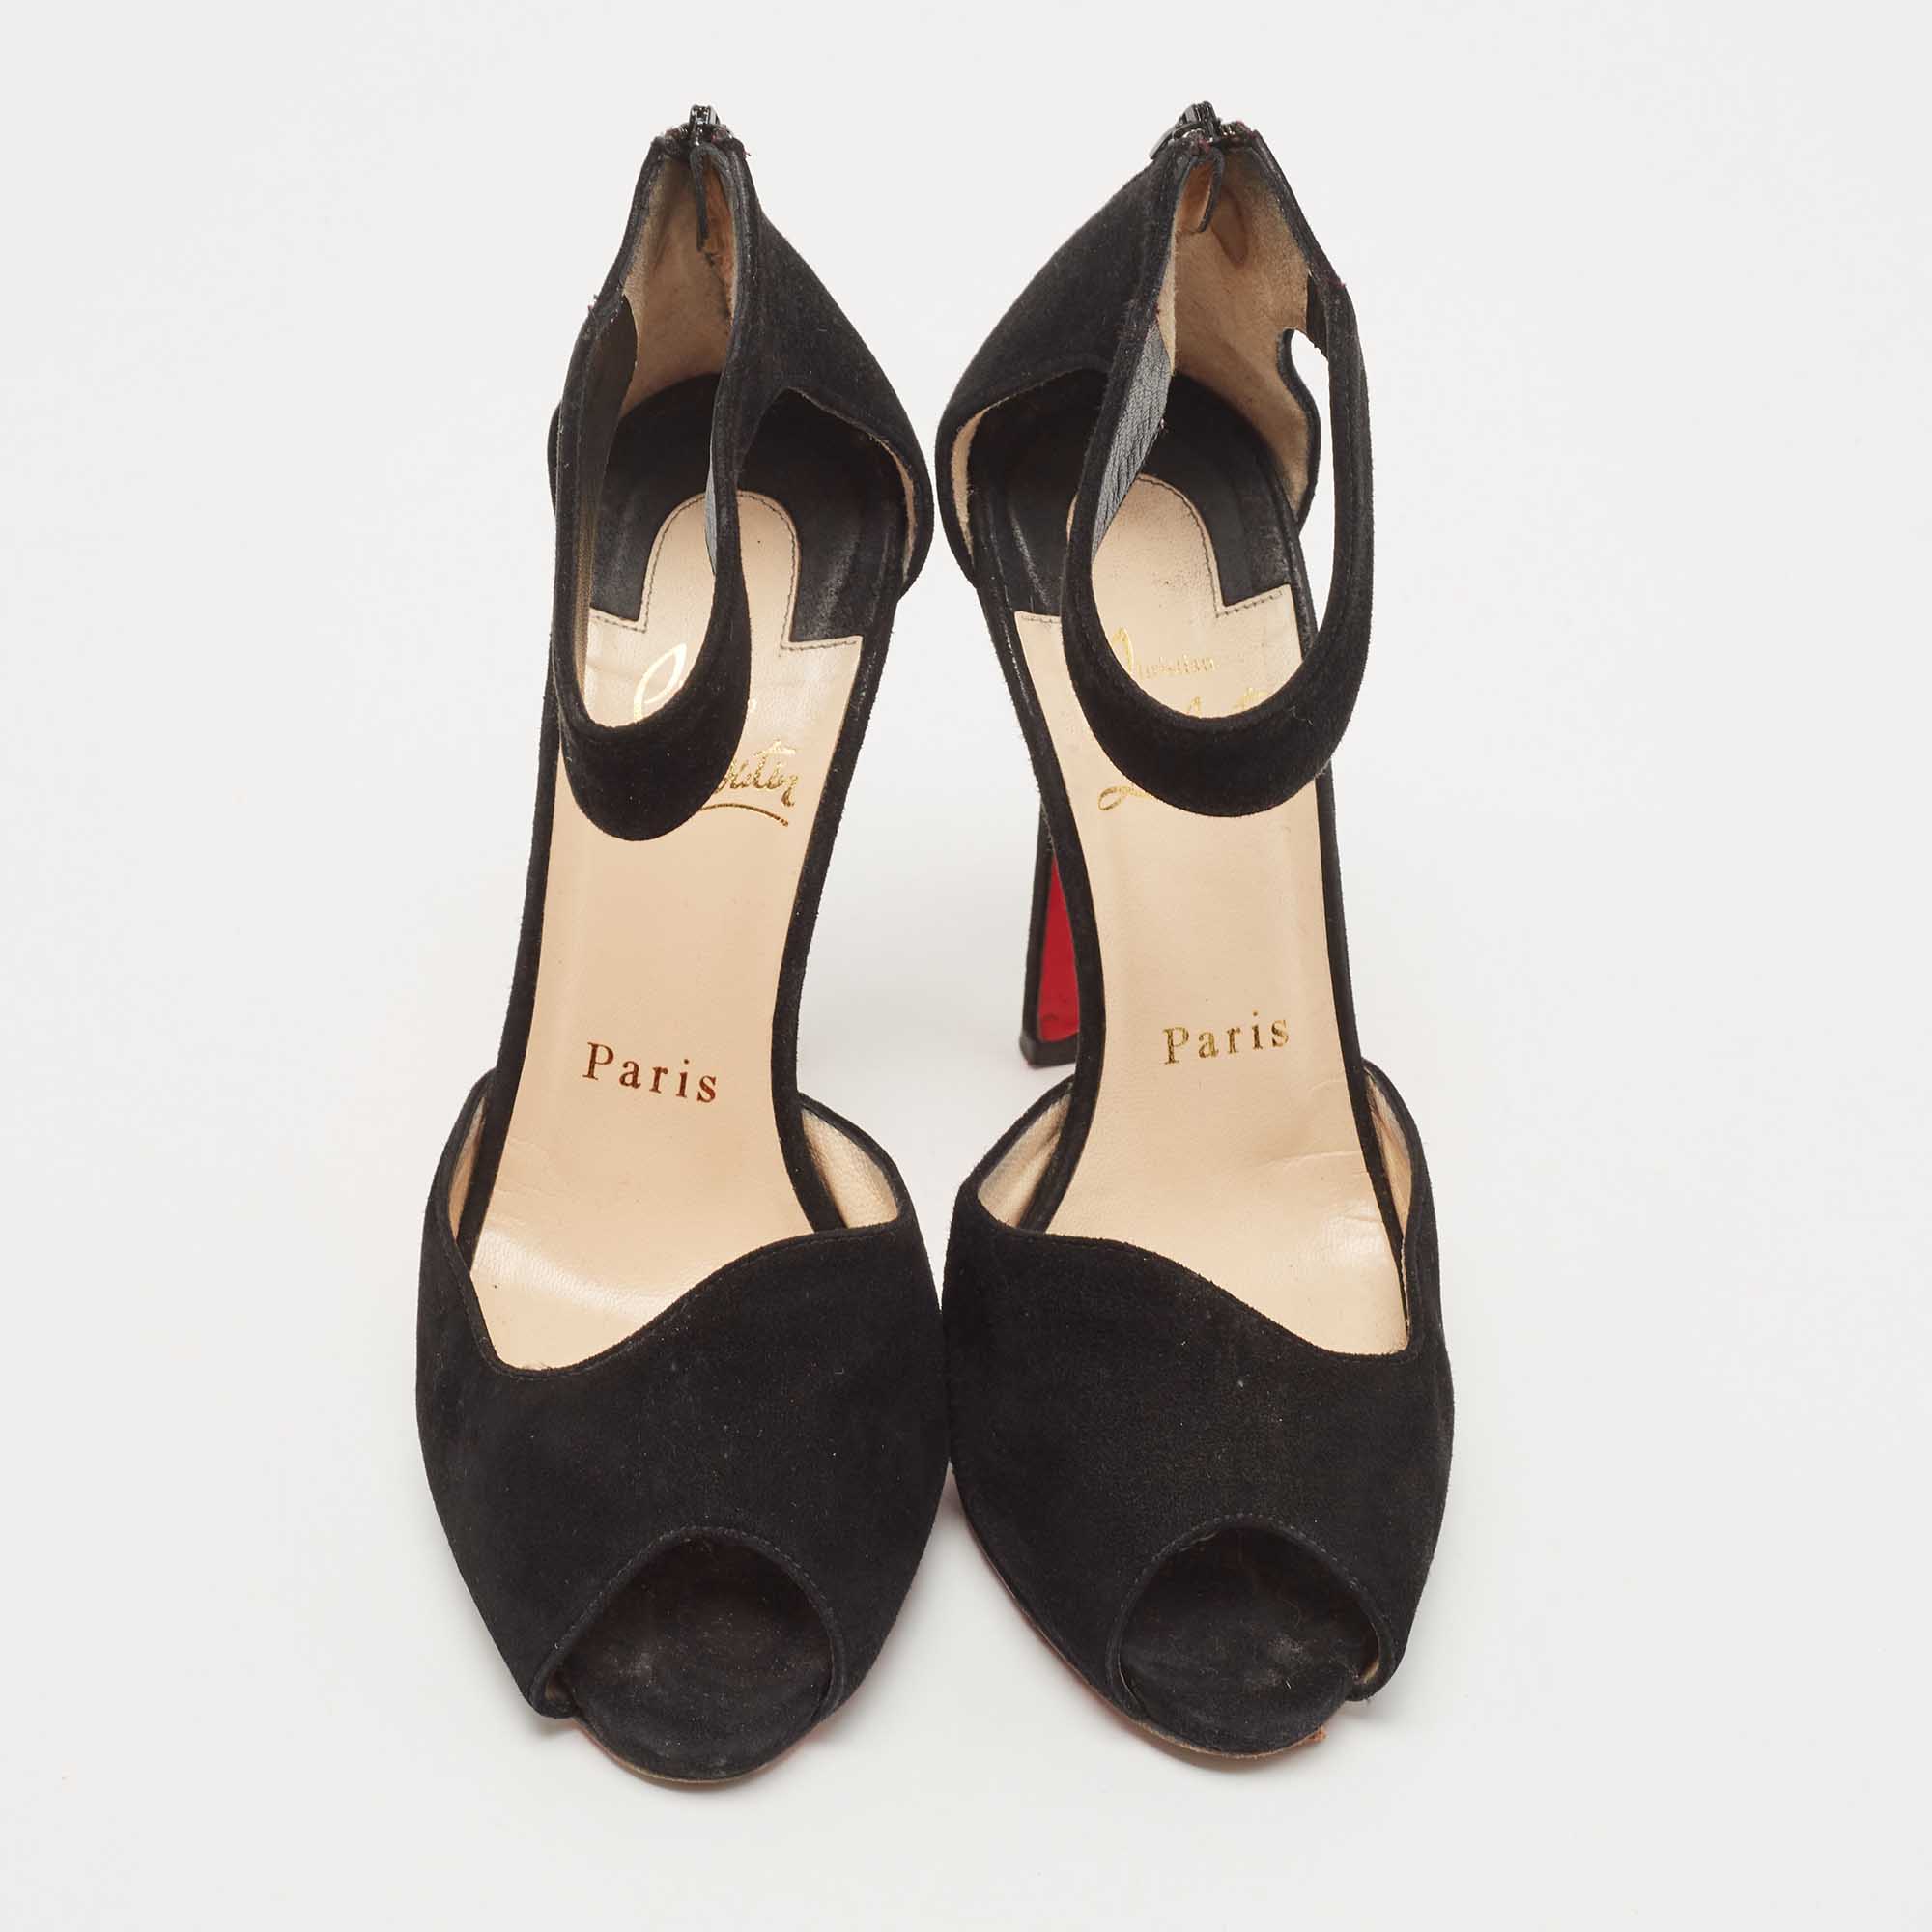 Christian Louboutin Black Suede Peep Toe Ankle Strap Sandals Size 36